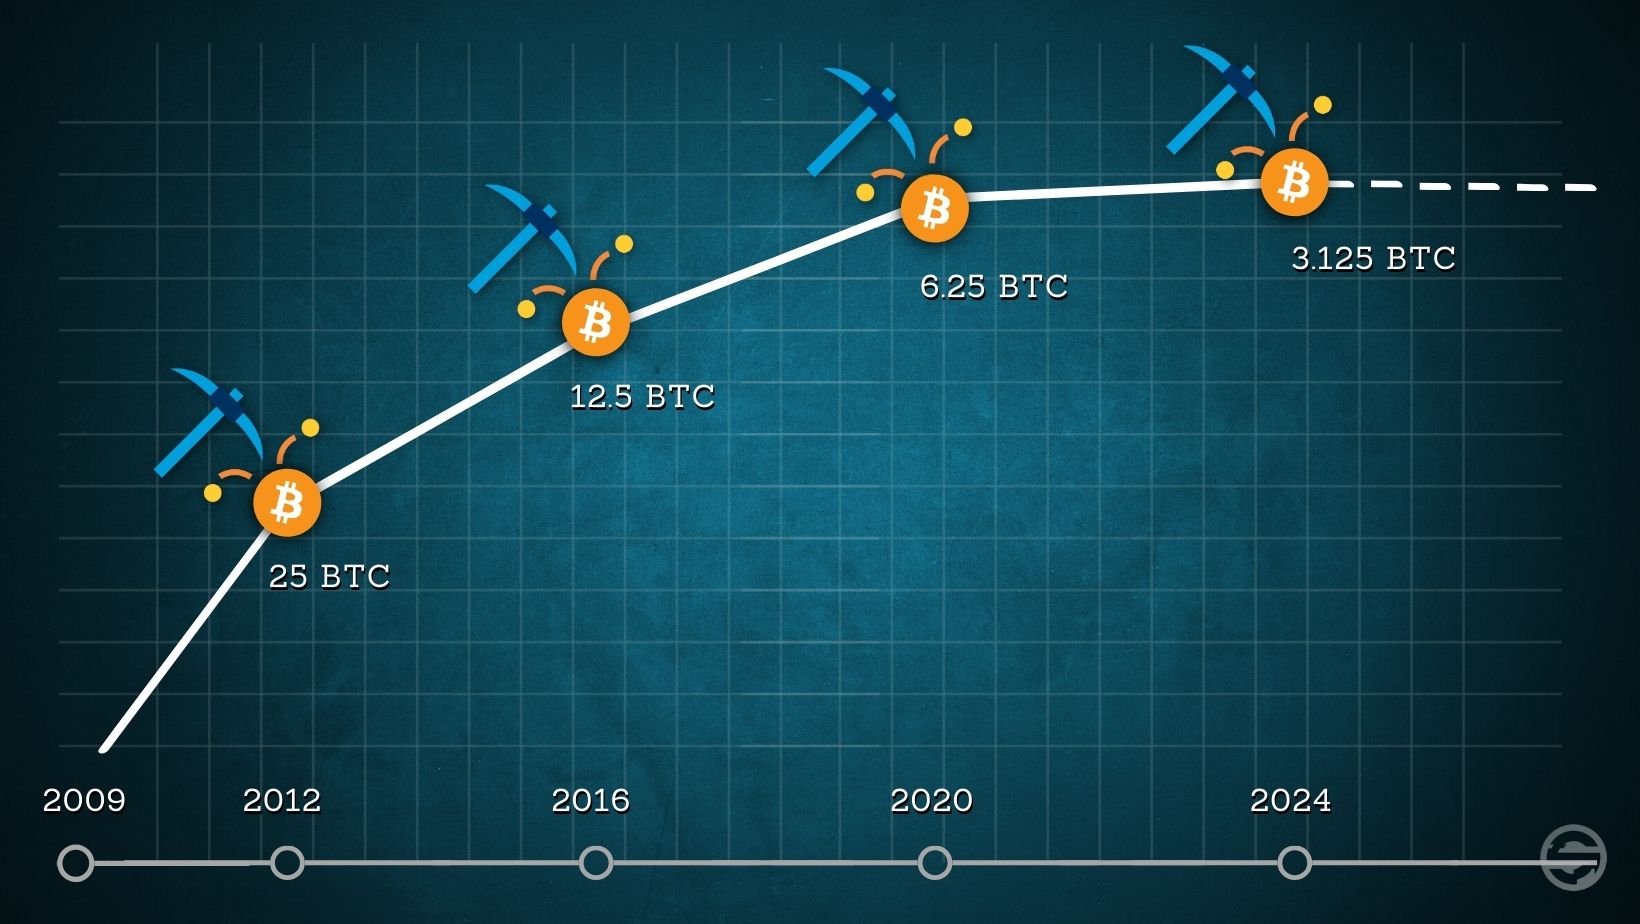 Bitcoin (BTC) halving: A periodic event expected by crypto investors